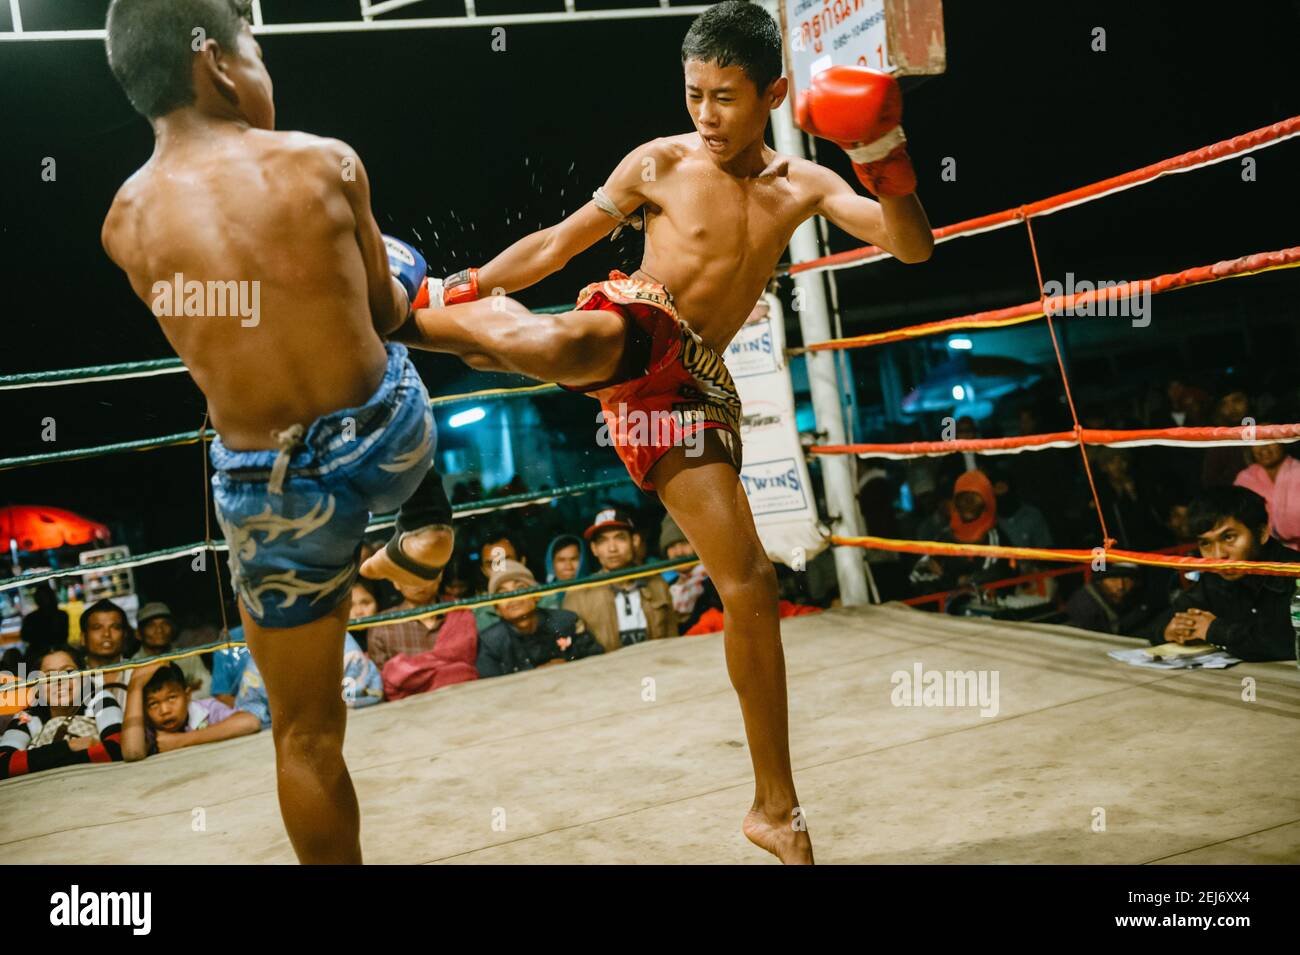 Thai boxing Muay Thai competition, one of the boxers throwing a high kick  at his opponent Stock Photo - Alamy